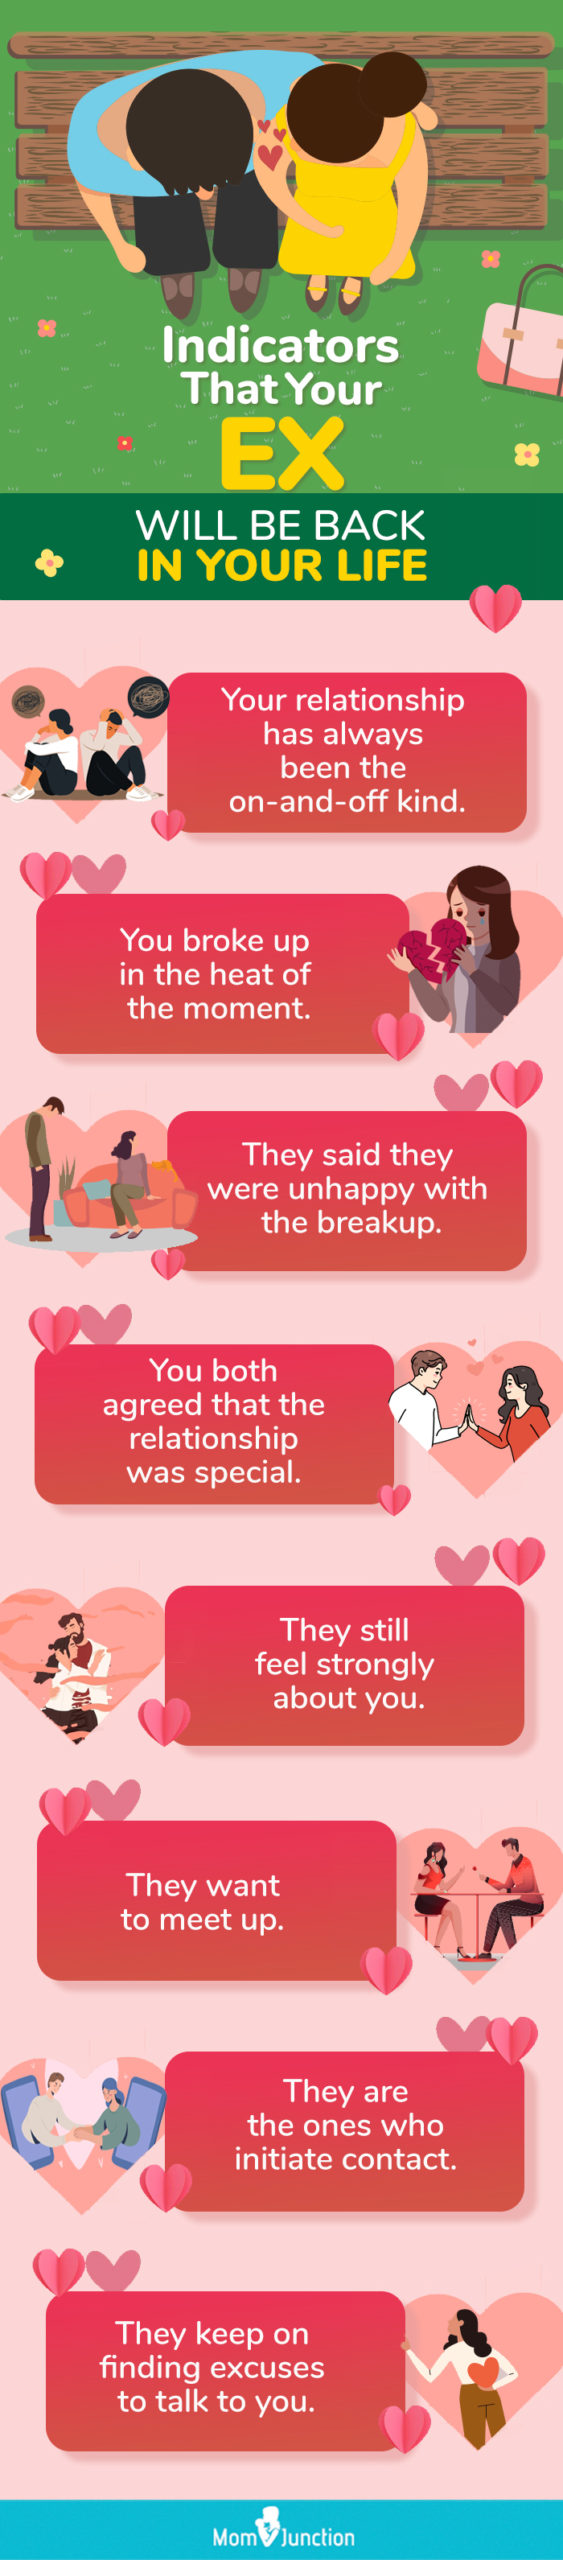 indicators that your ex will [infographic]